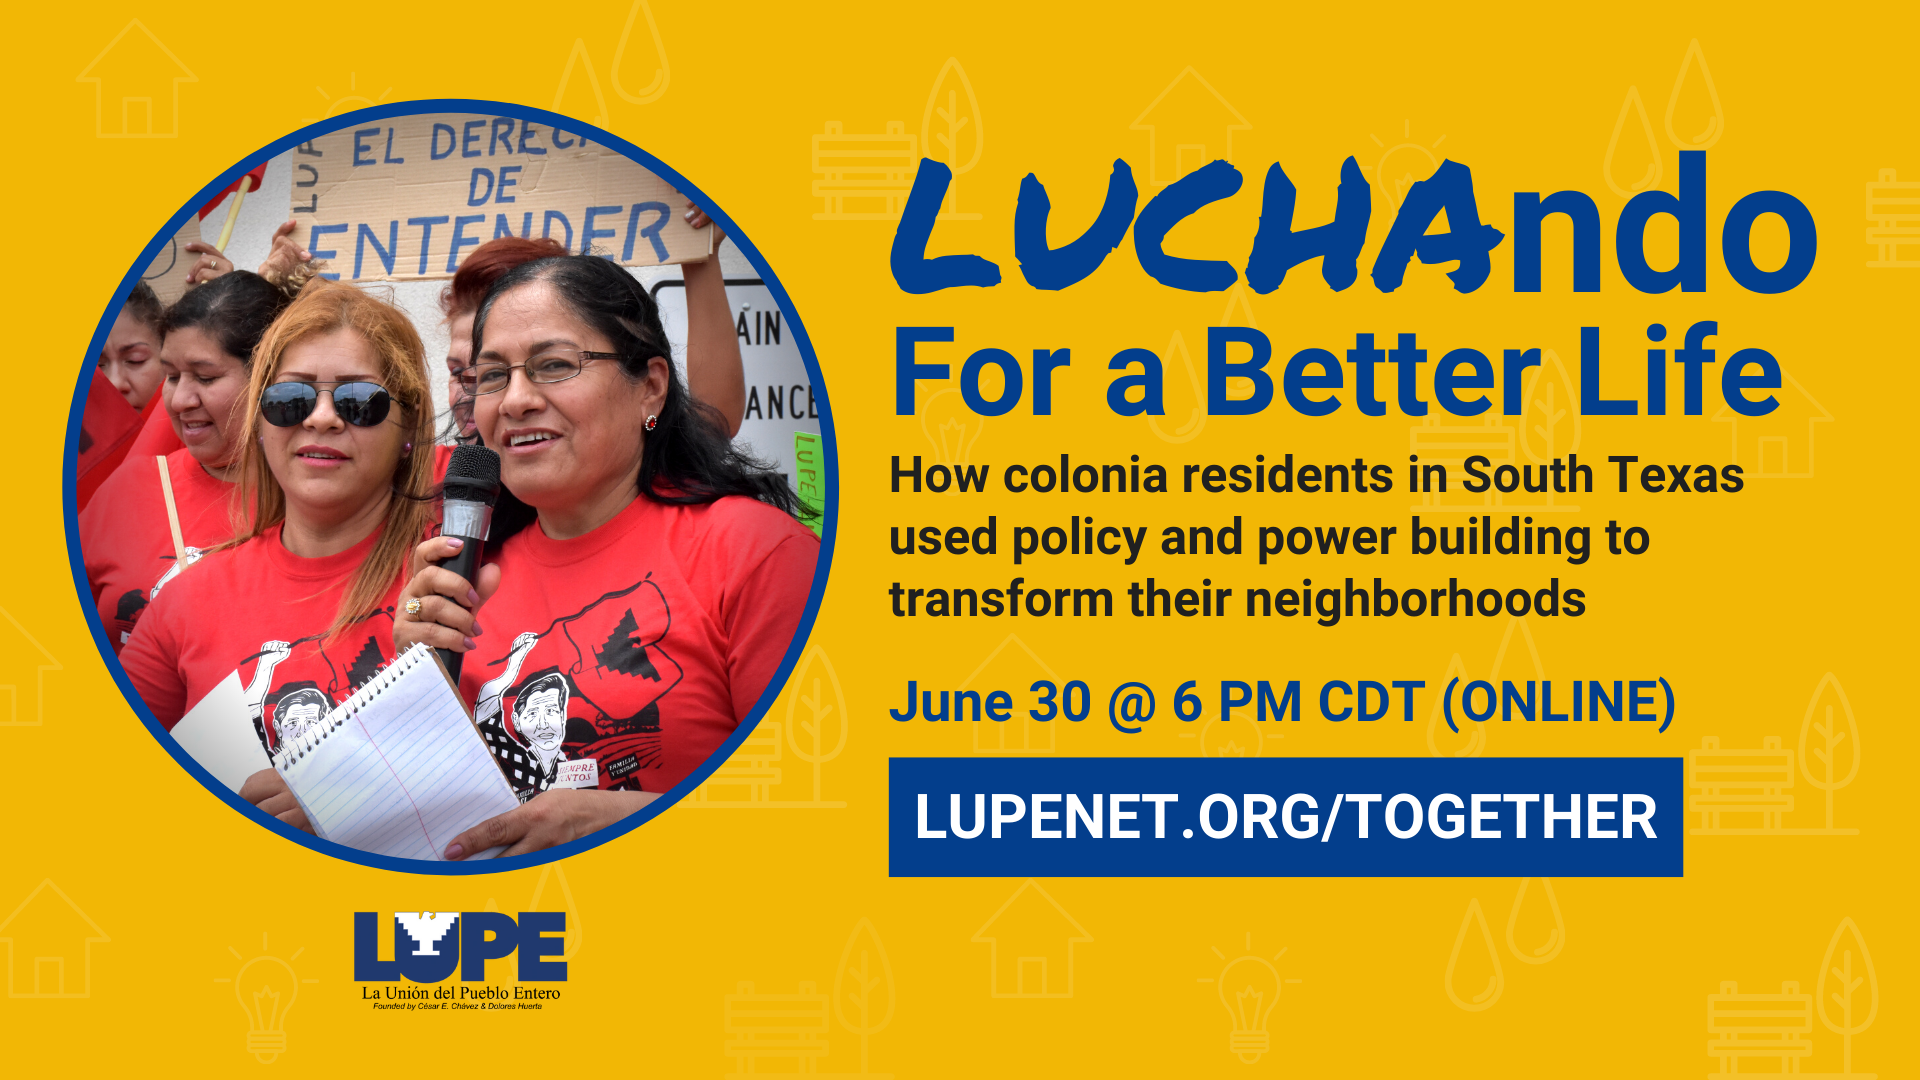 Graphic showing photo of joyful latina women in red shirts, one of them is holding a microphone. Next to the photo, the graphic says "LUCHAndo for a better life: how colonia residents in south texas used policy and power building to transform their neighborhoods. June 30th at 6 PM Central (online). lupenet.org/together "